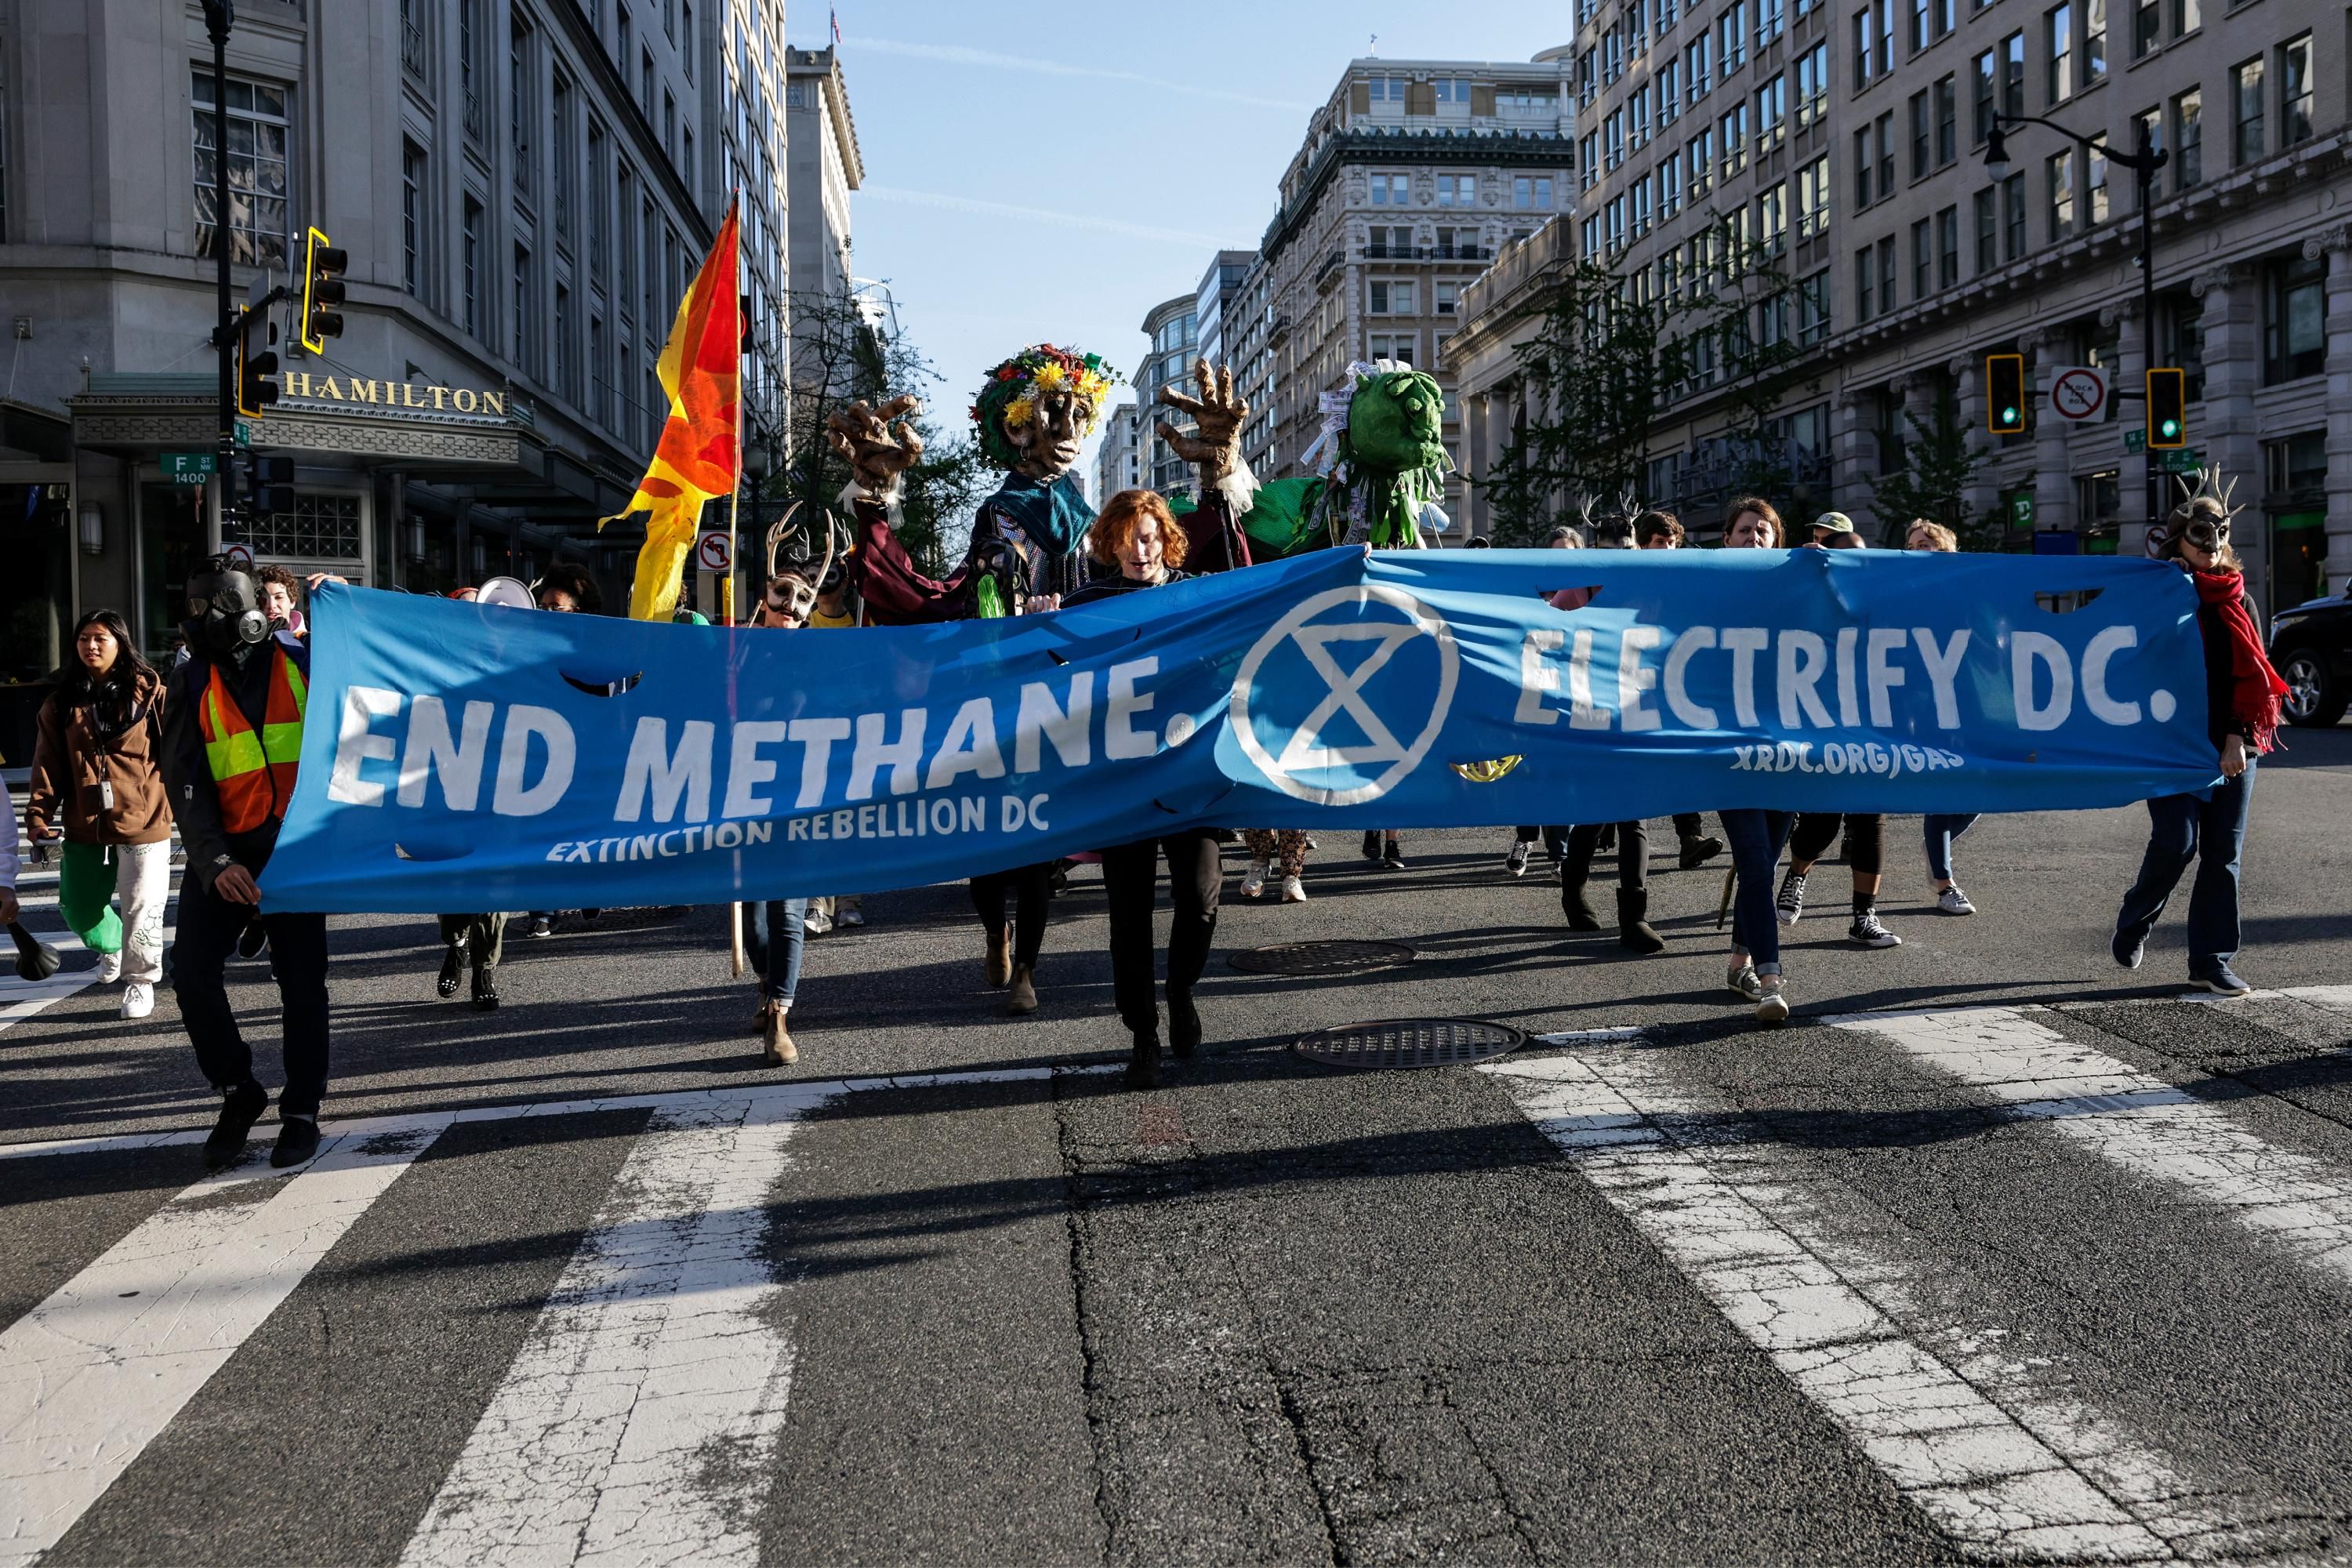 Protesters hold "End Methane" sign at a march in Washington DC